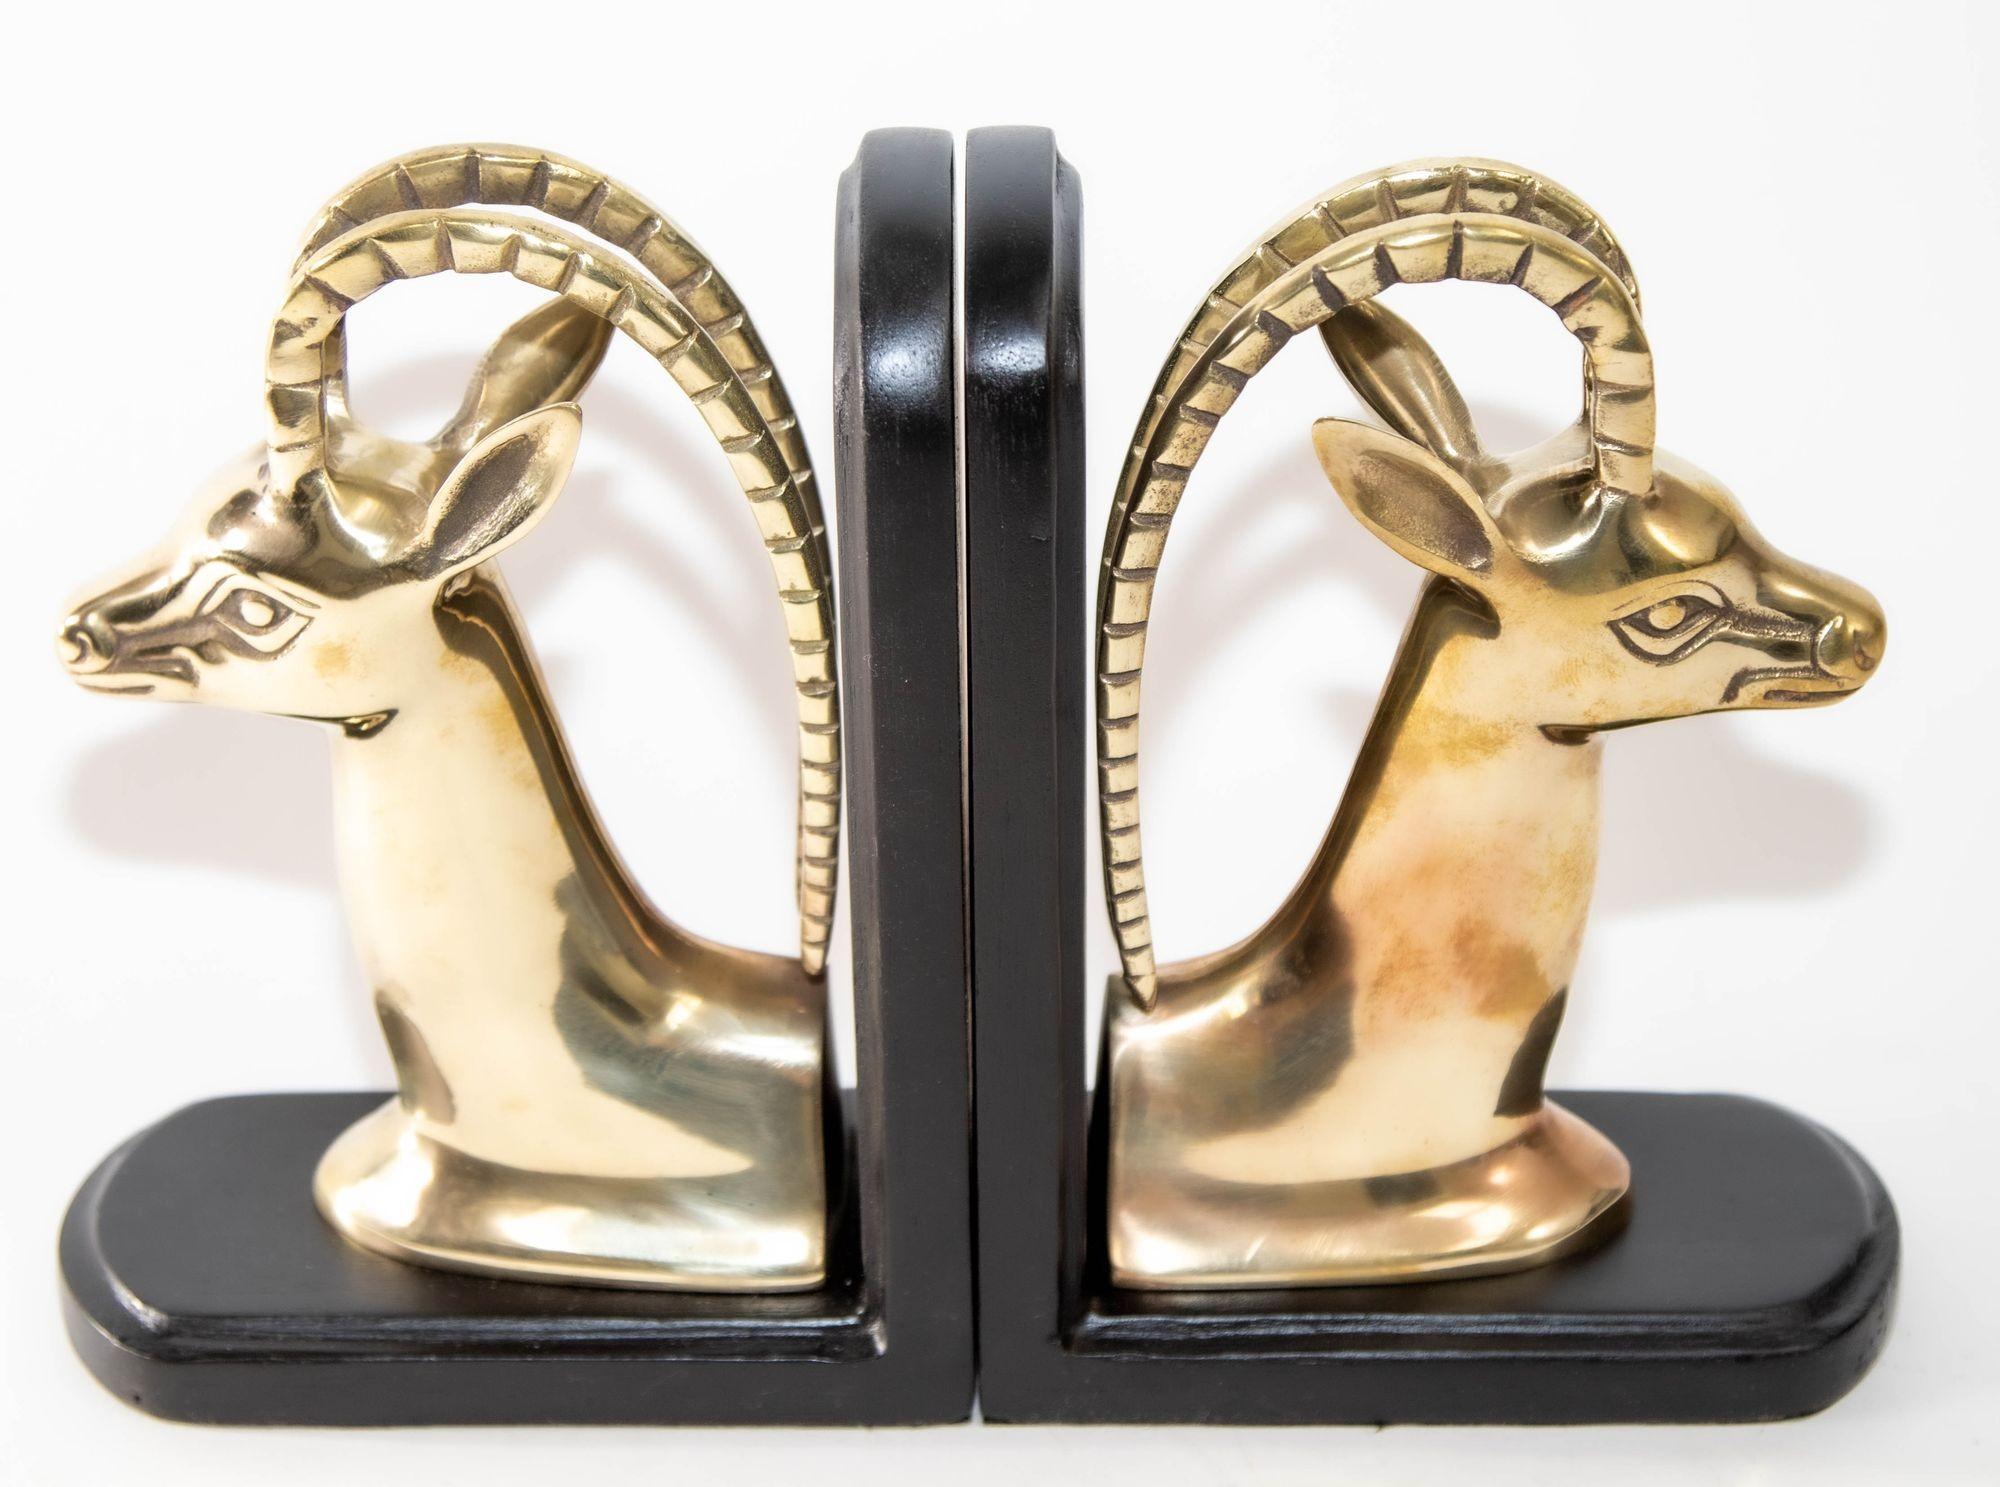 American 1950s Pair Art Deco Revival Polished Brass Gazelle Antelope Mount Bookends For Sale